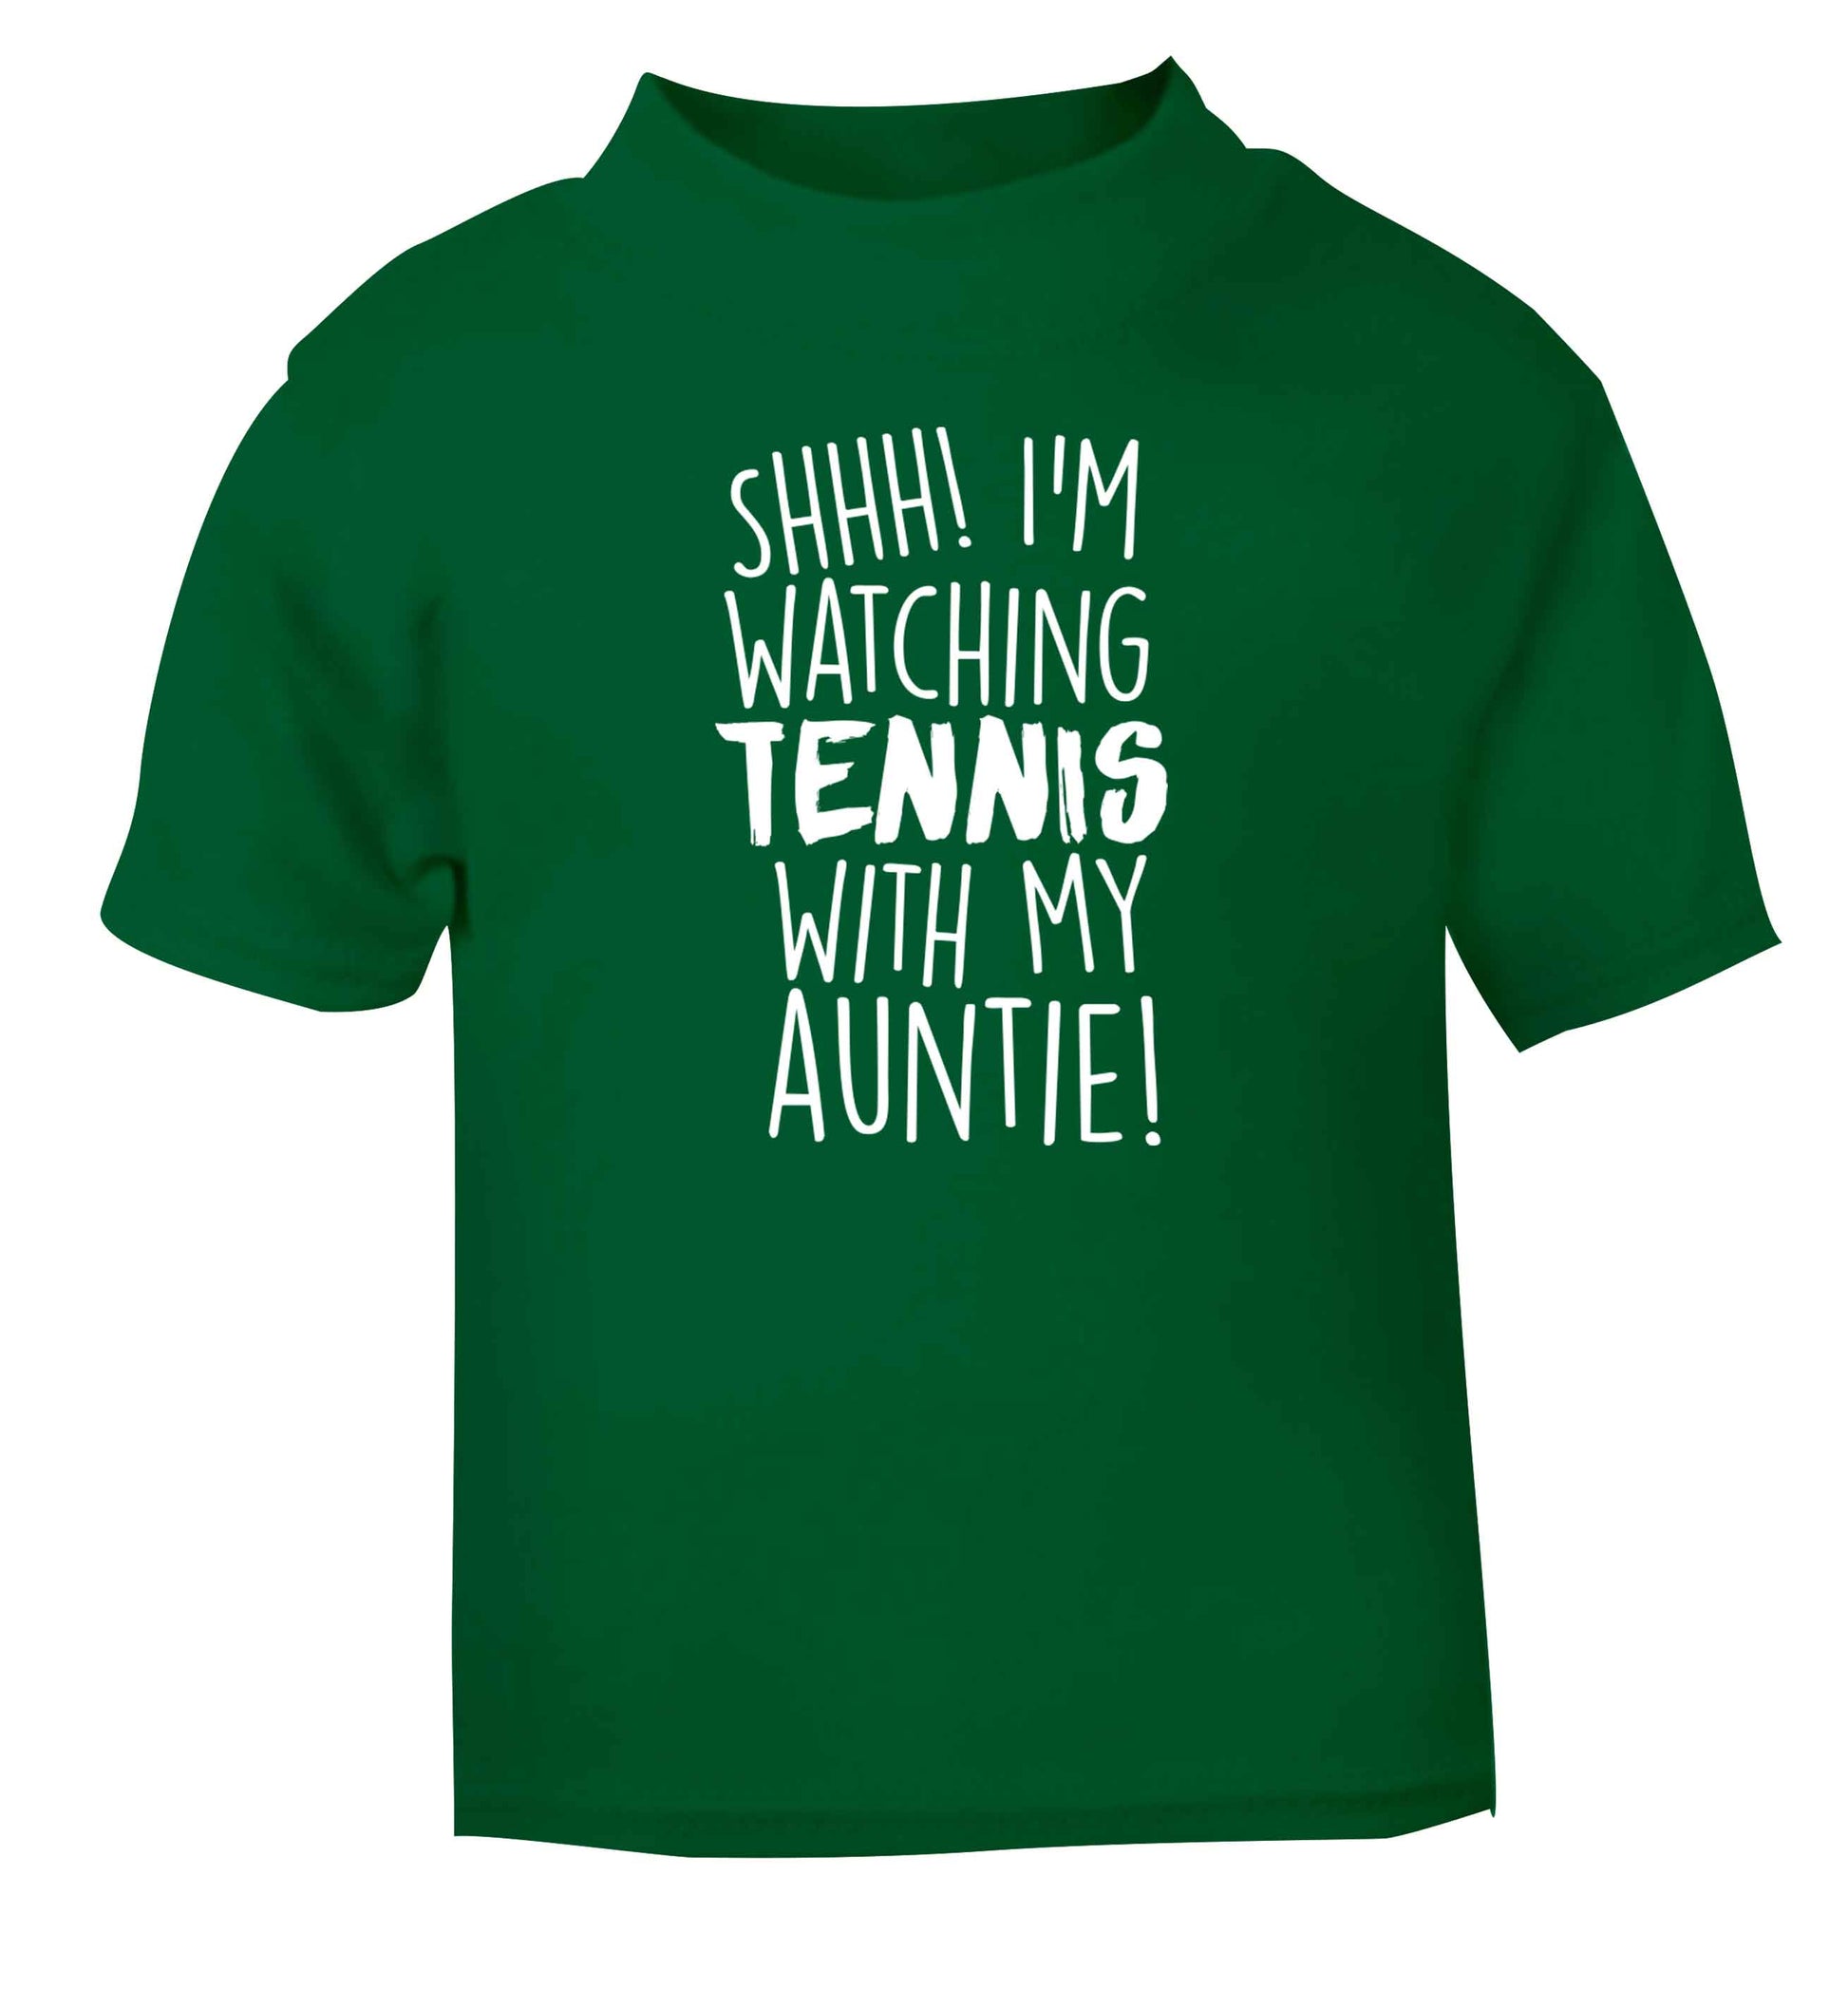 Shh! I'm watching tennis with my auntie! green Baby Toddler Tshirt 2 Years